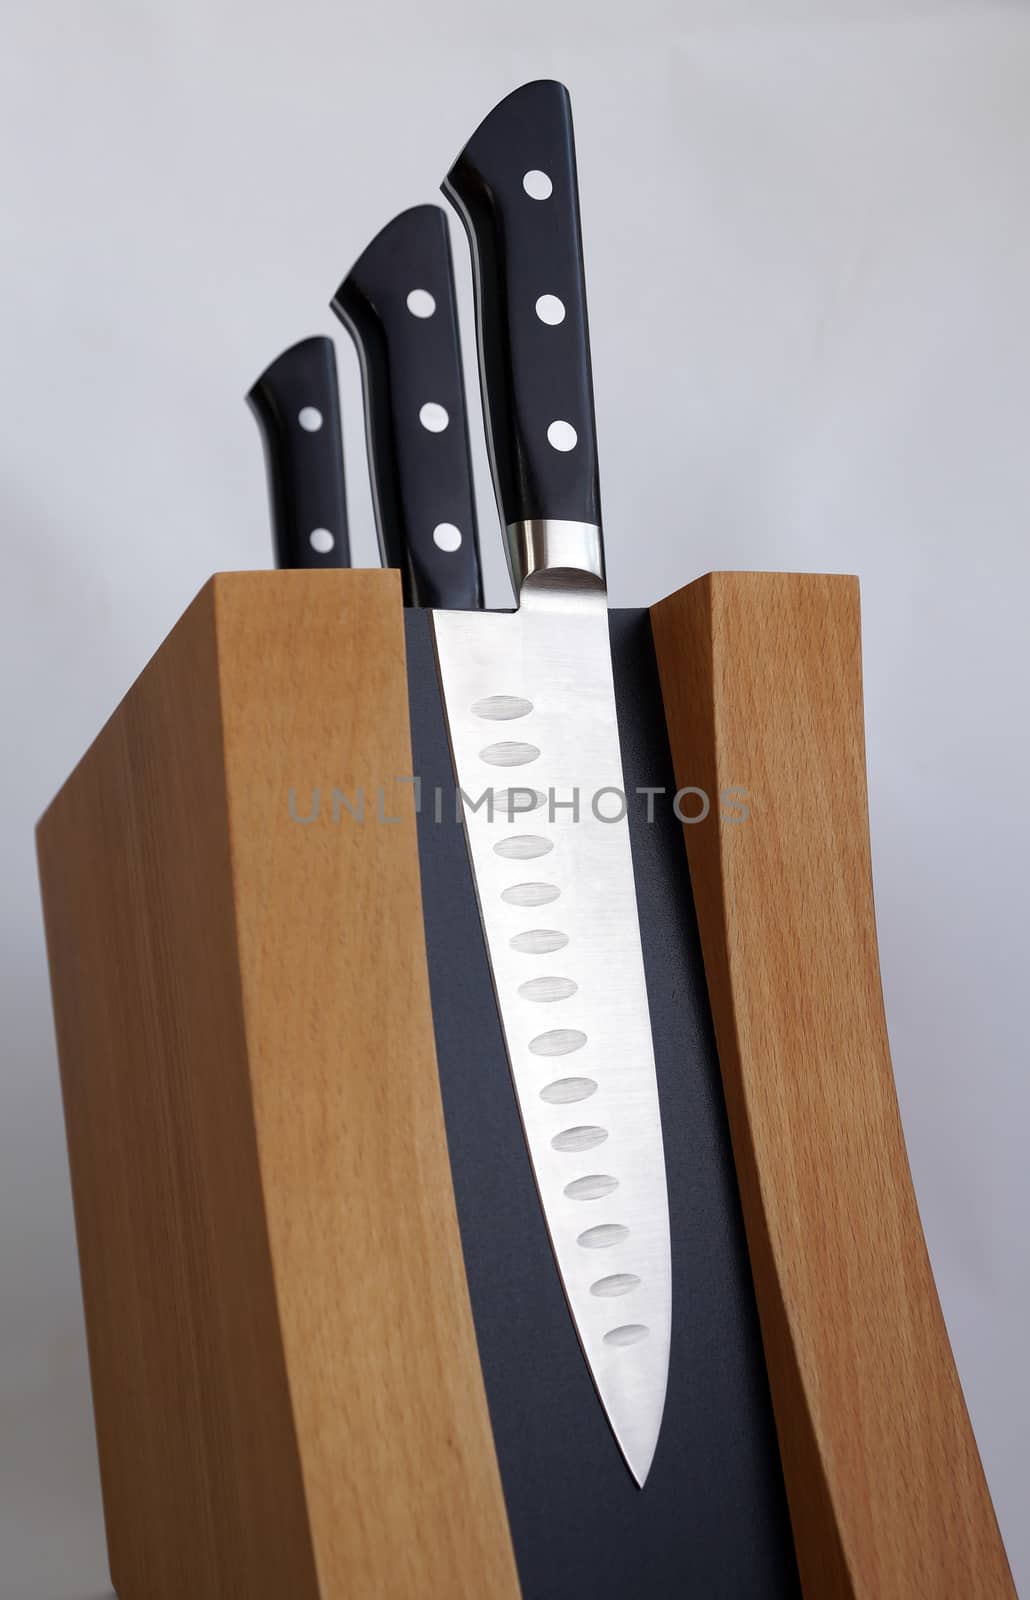 Support with a kitchen knives by Vadimdem